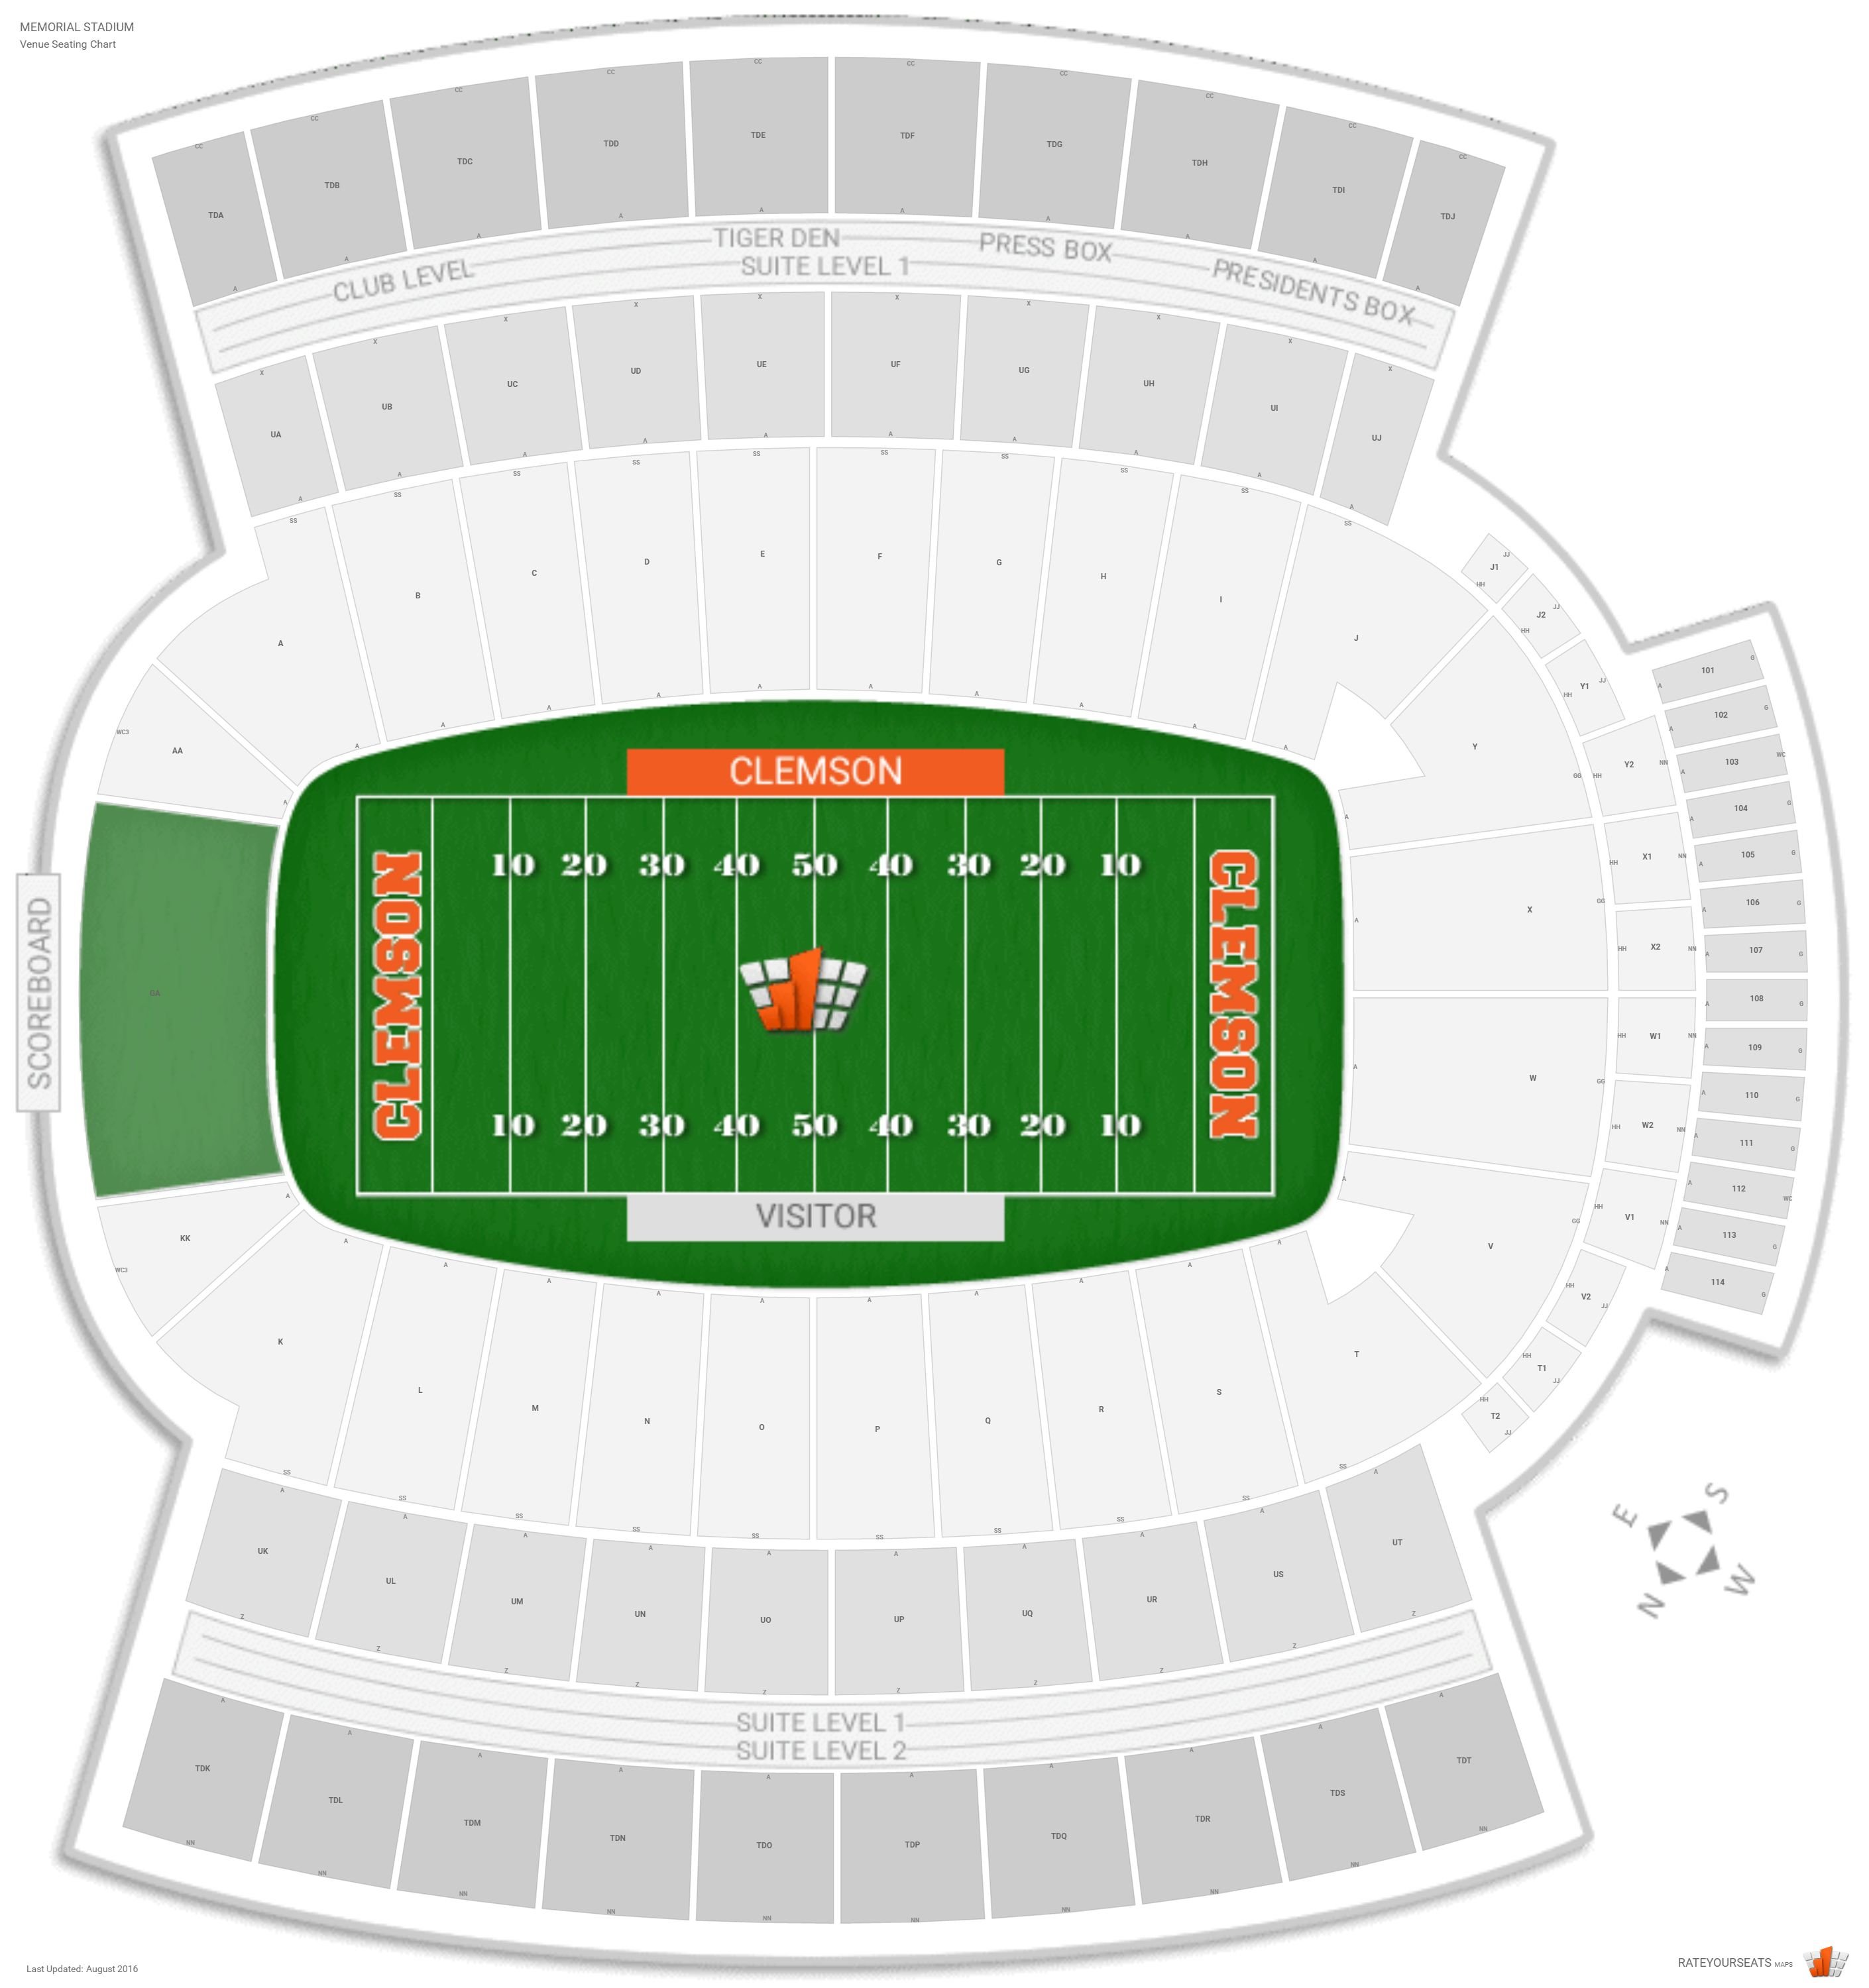 Clemson Memorial Stadium Seating Chart With Seat Numbers